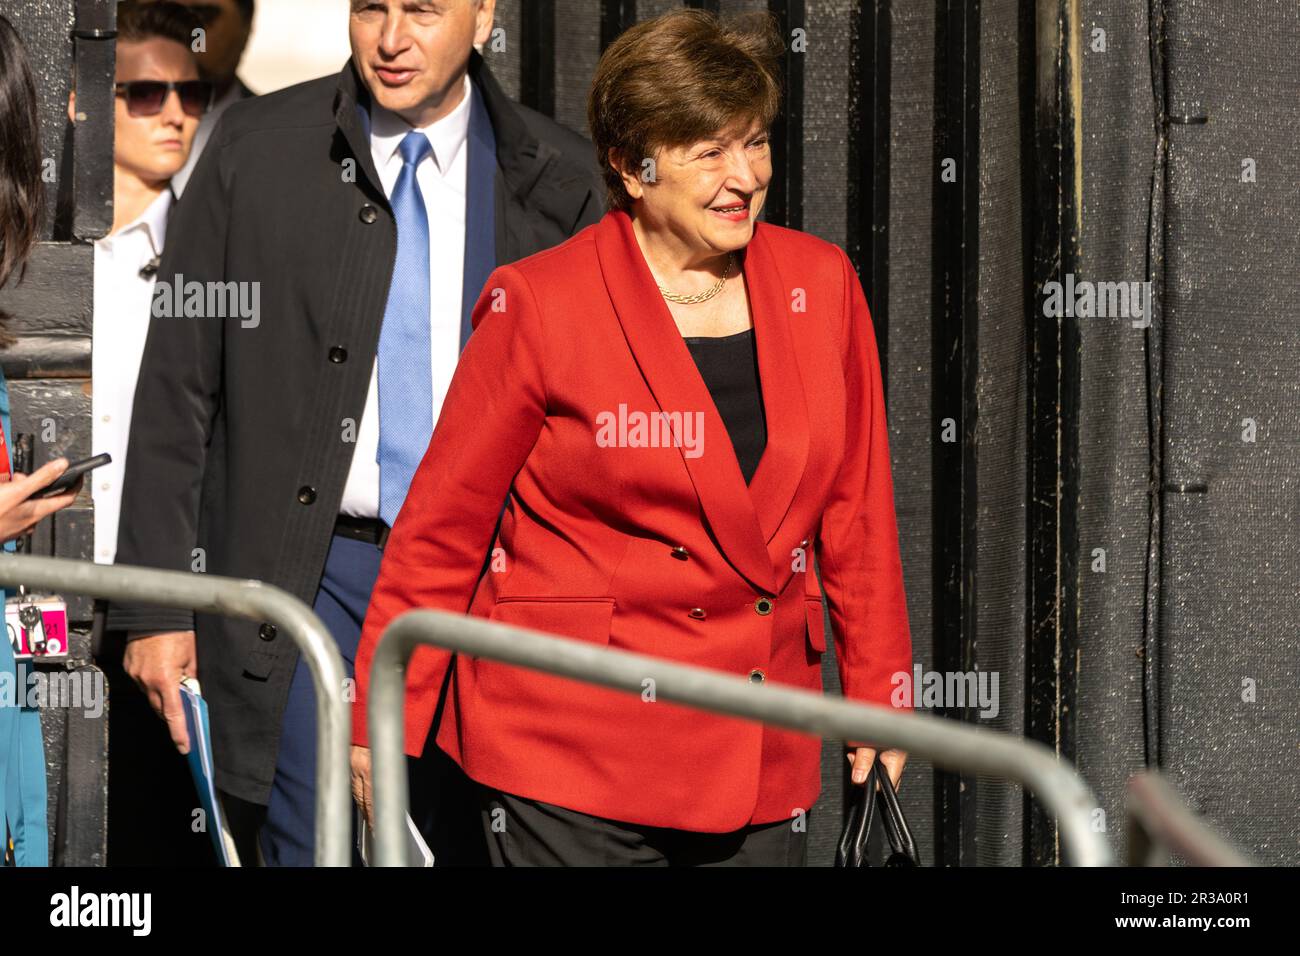 London, UK. 23rd May, 2023. Jeremy Hunt, Chancellor of the Exchequer, meets with Kristalina Georgieva Managing Director of the International Monetary Fund at 11 Downing Street London UK Kristalina Georgieva arrives in Downing Street Credit: Ian Davidson/Alamy Live News Stock Photo